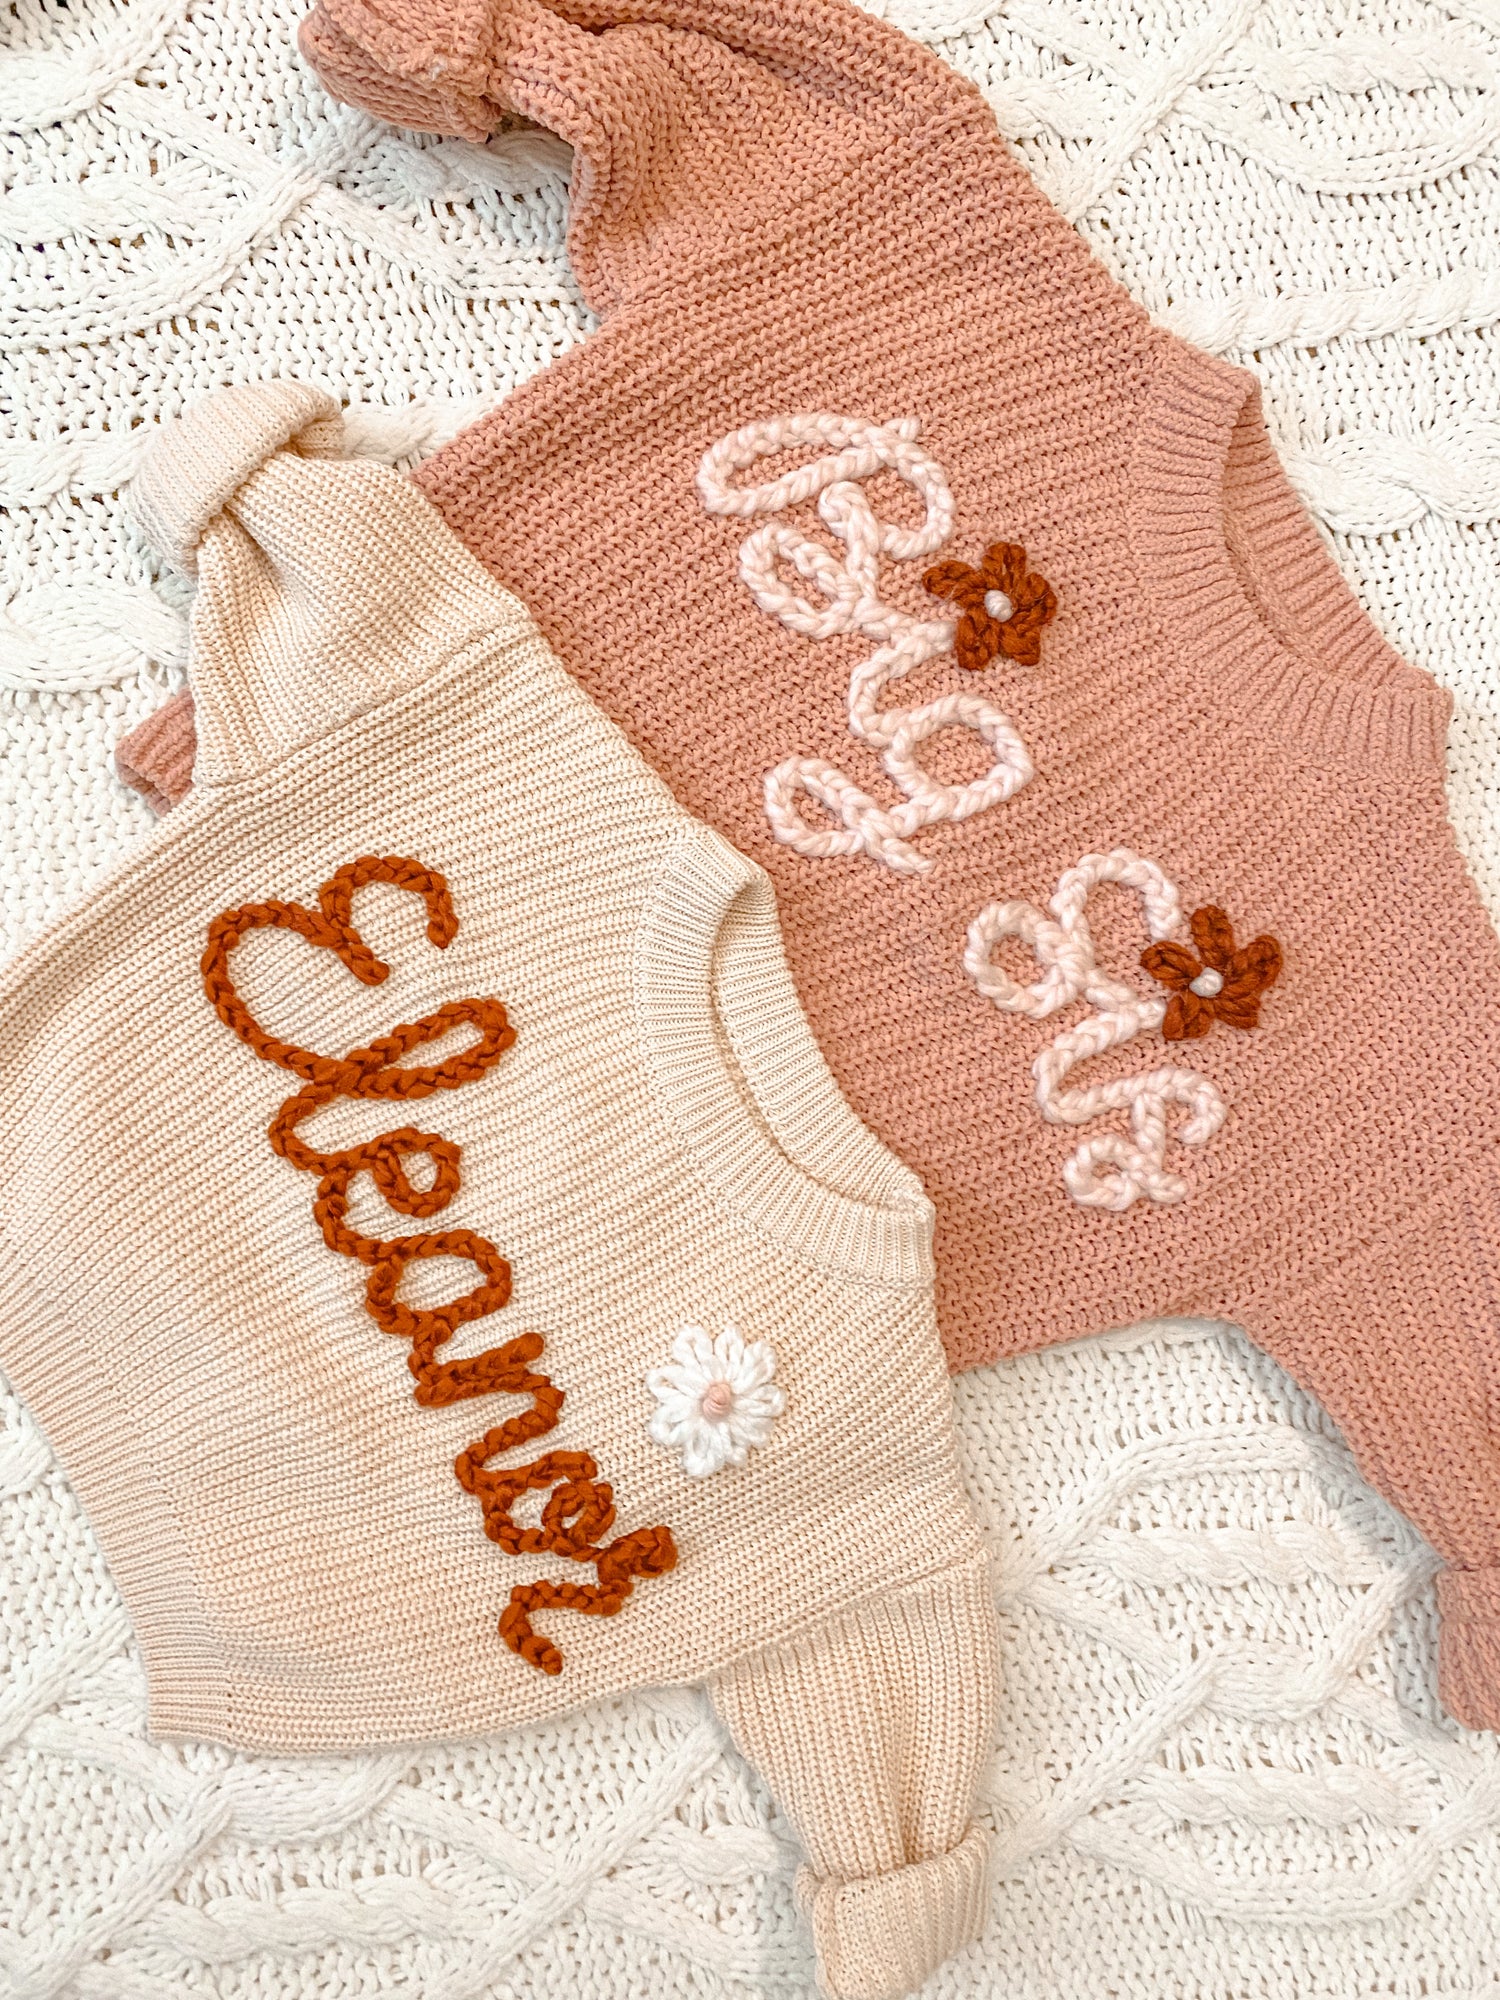 Custom Embroidered Items for Littles